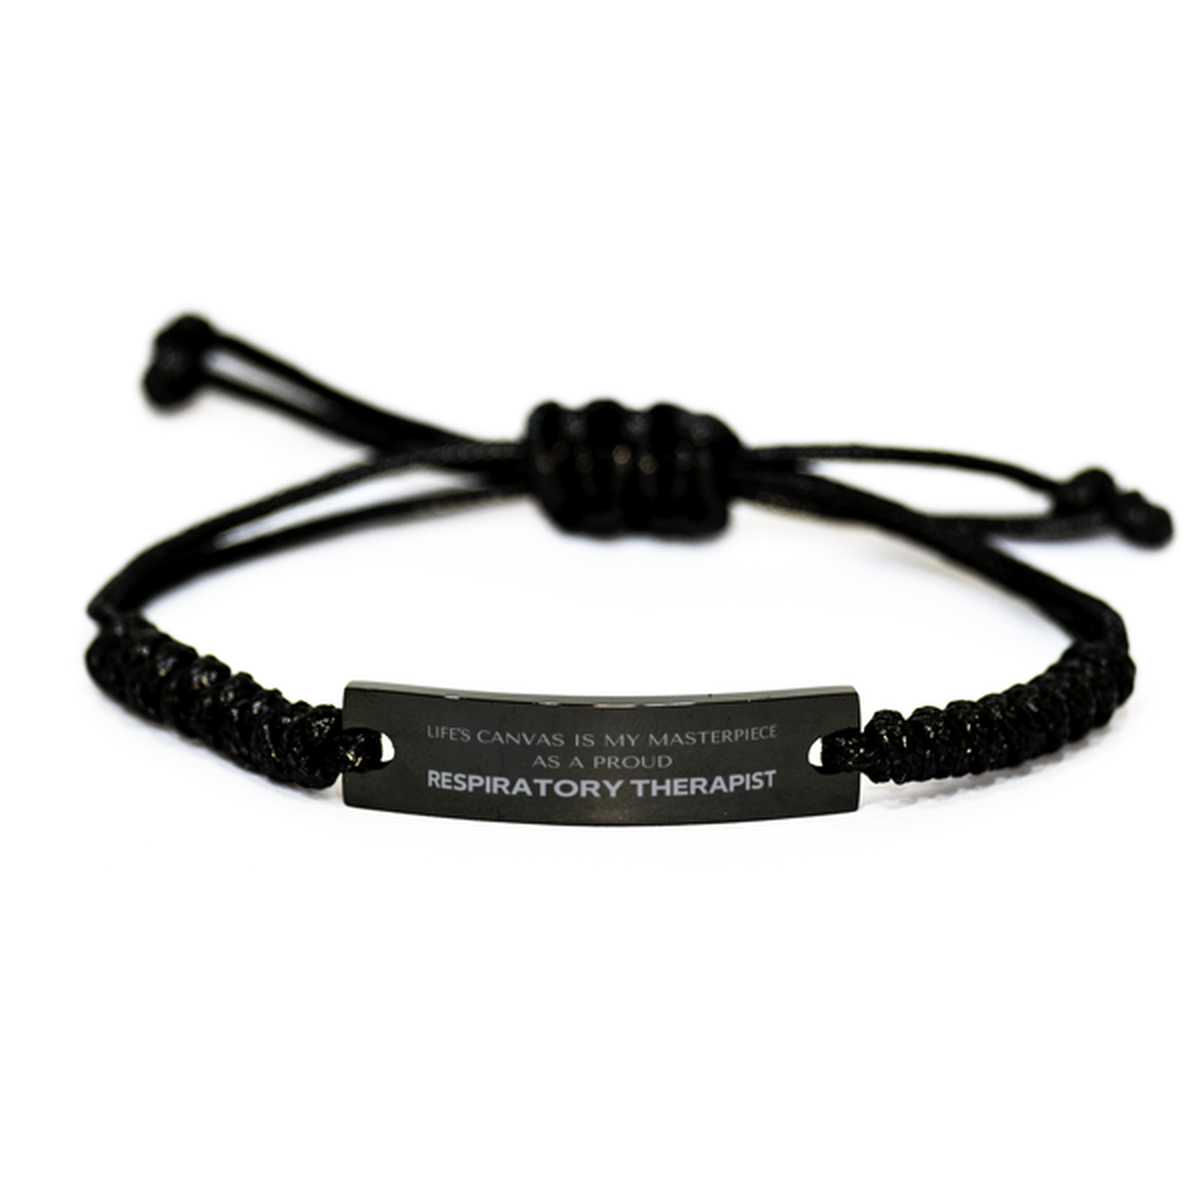 Proud Respiratory Therapist Gifts, Life's canvas is my masterpiece, Epic Birthday Christmas Unique Black Rope Bracelet For Respiratory Therapist, Coworkers, Men, Women, Friends